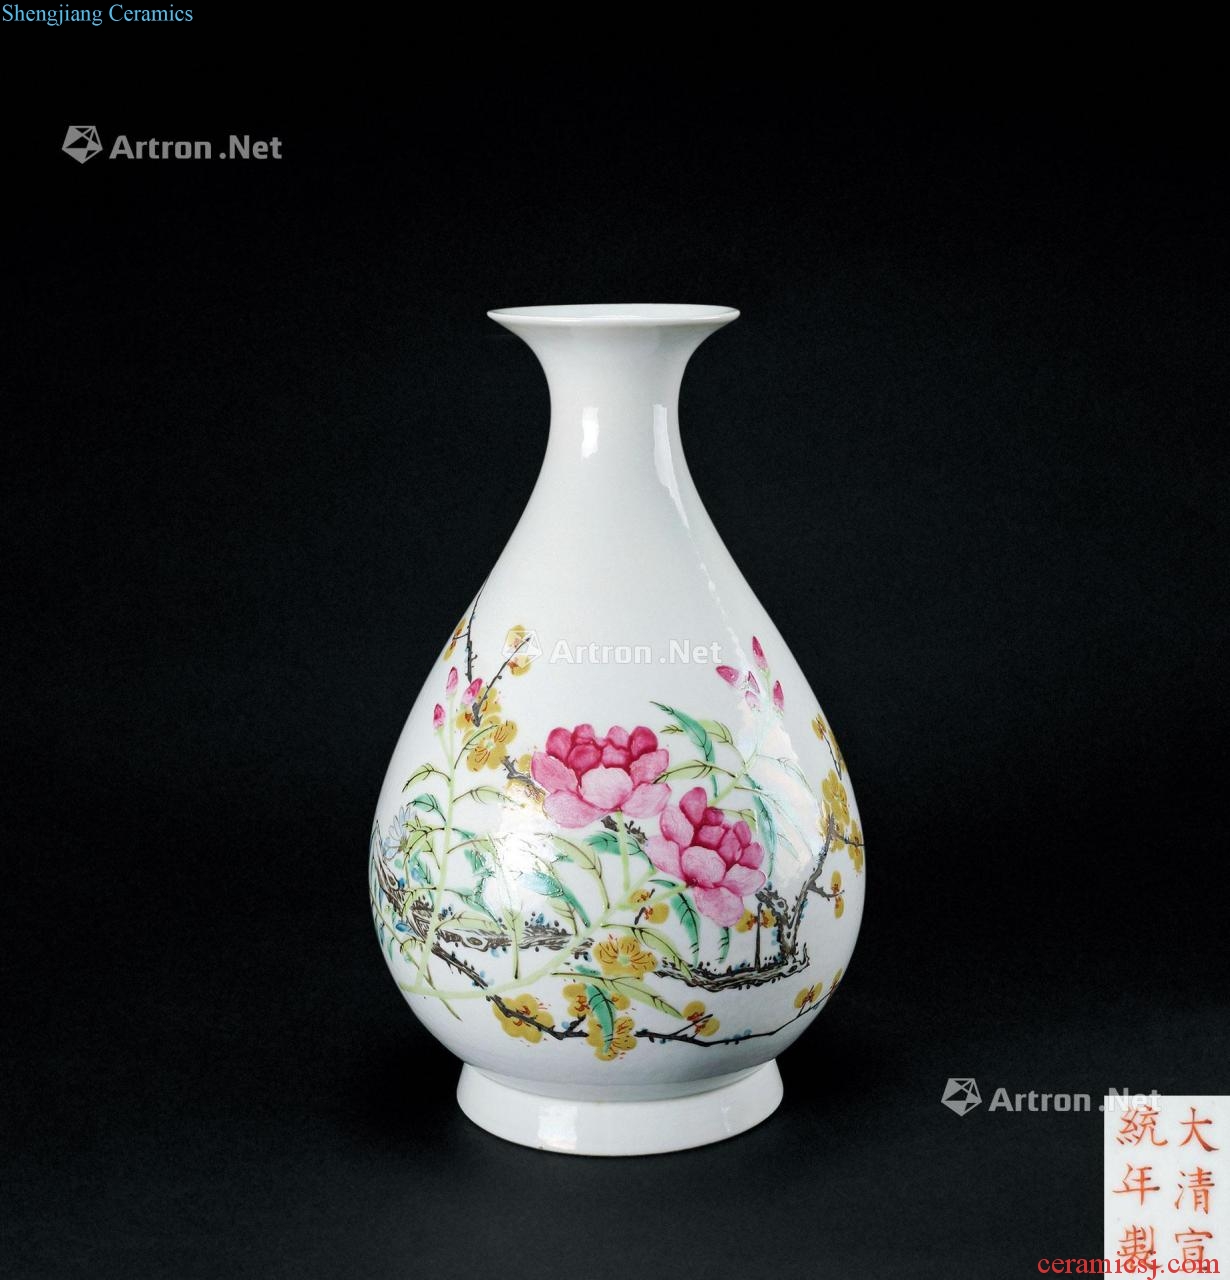 Pastel flowers lines in the qing dynasty okho spring bottle